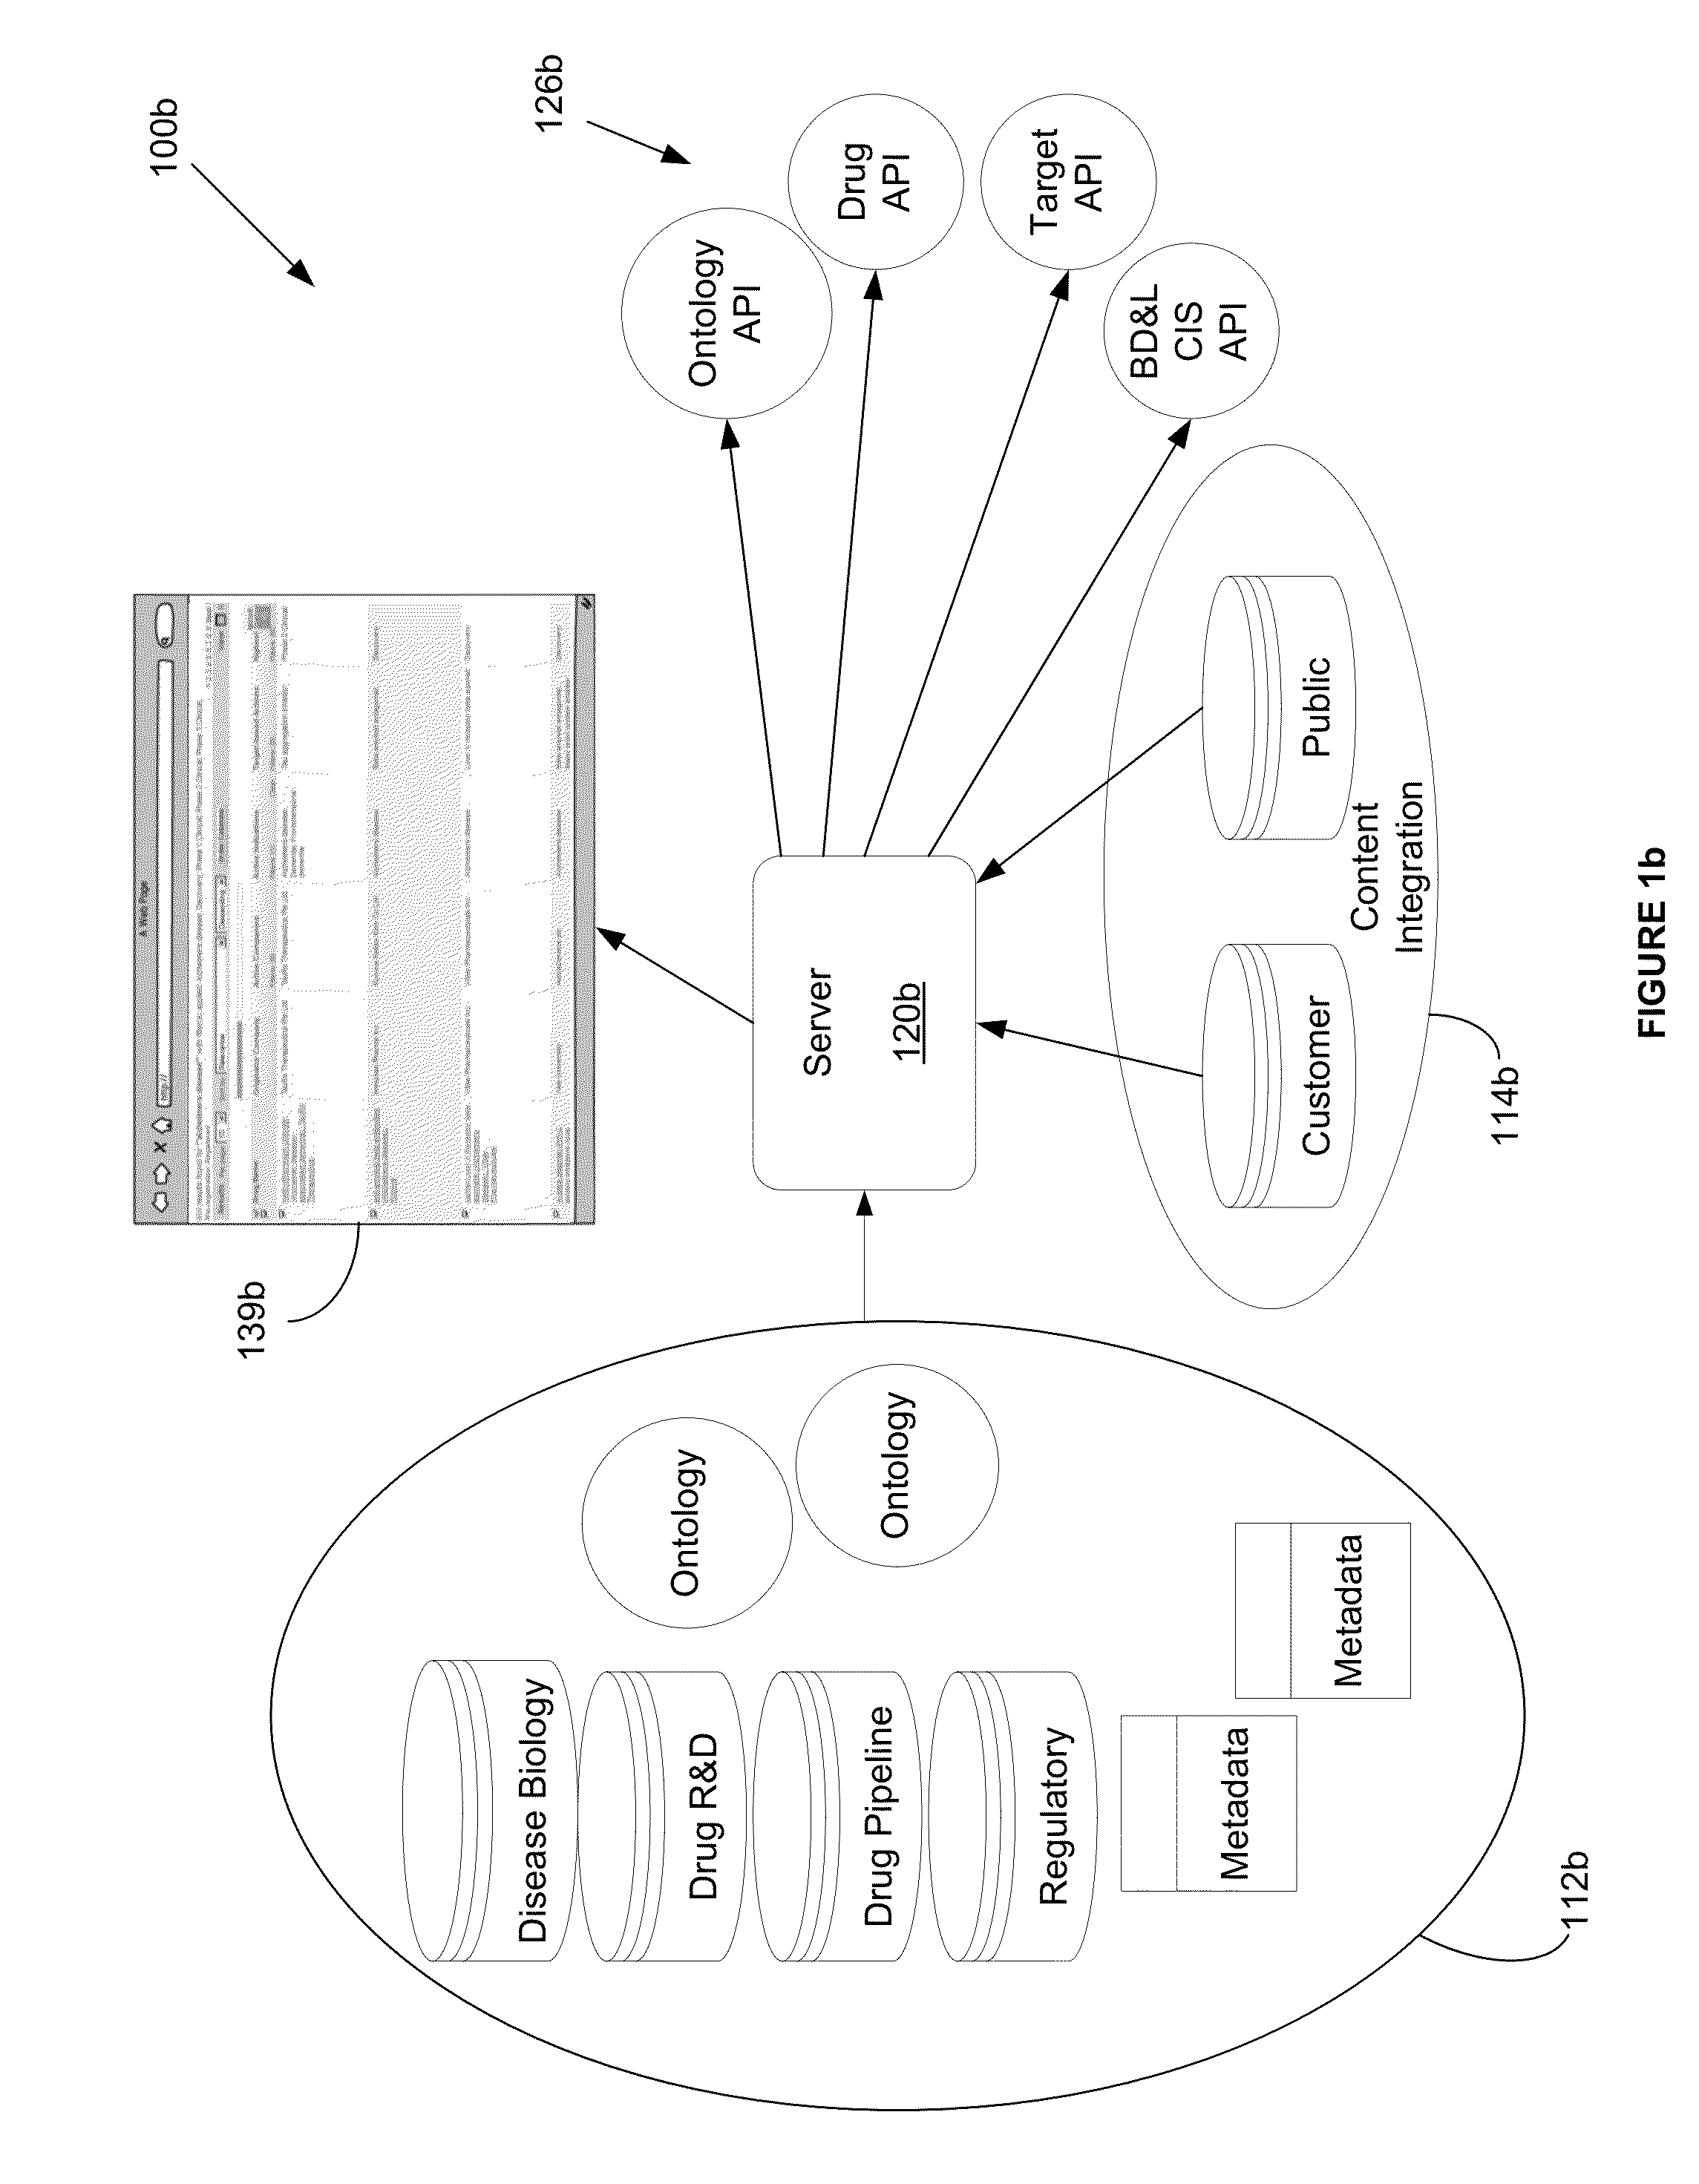 Methods and systems for business development and licensing and competitive intelligence